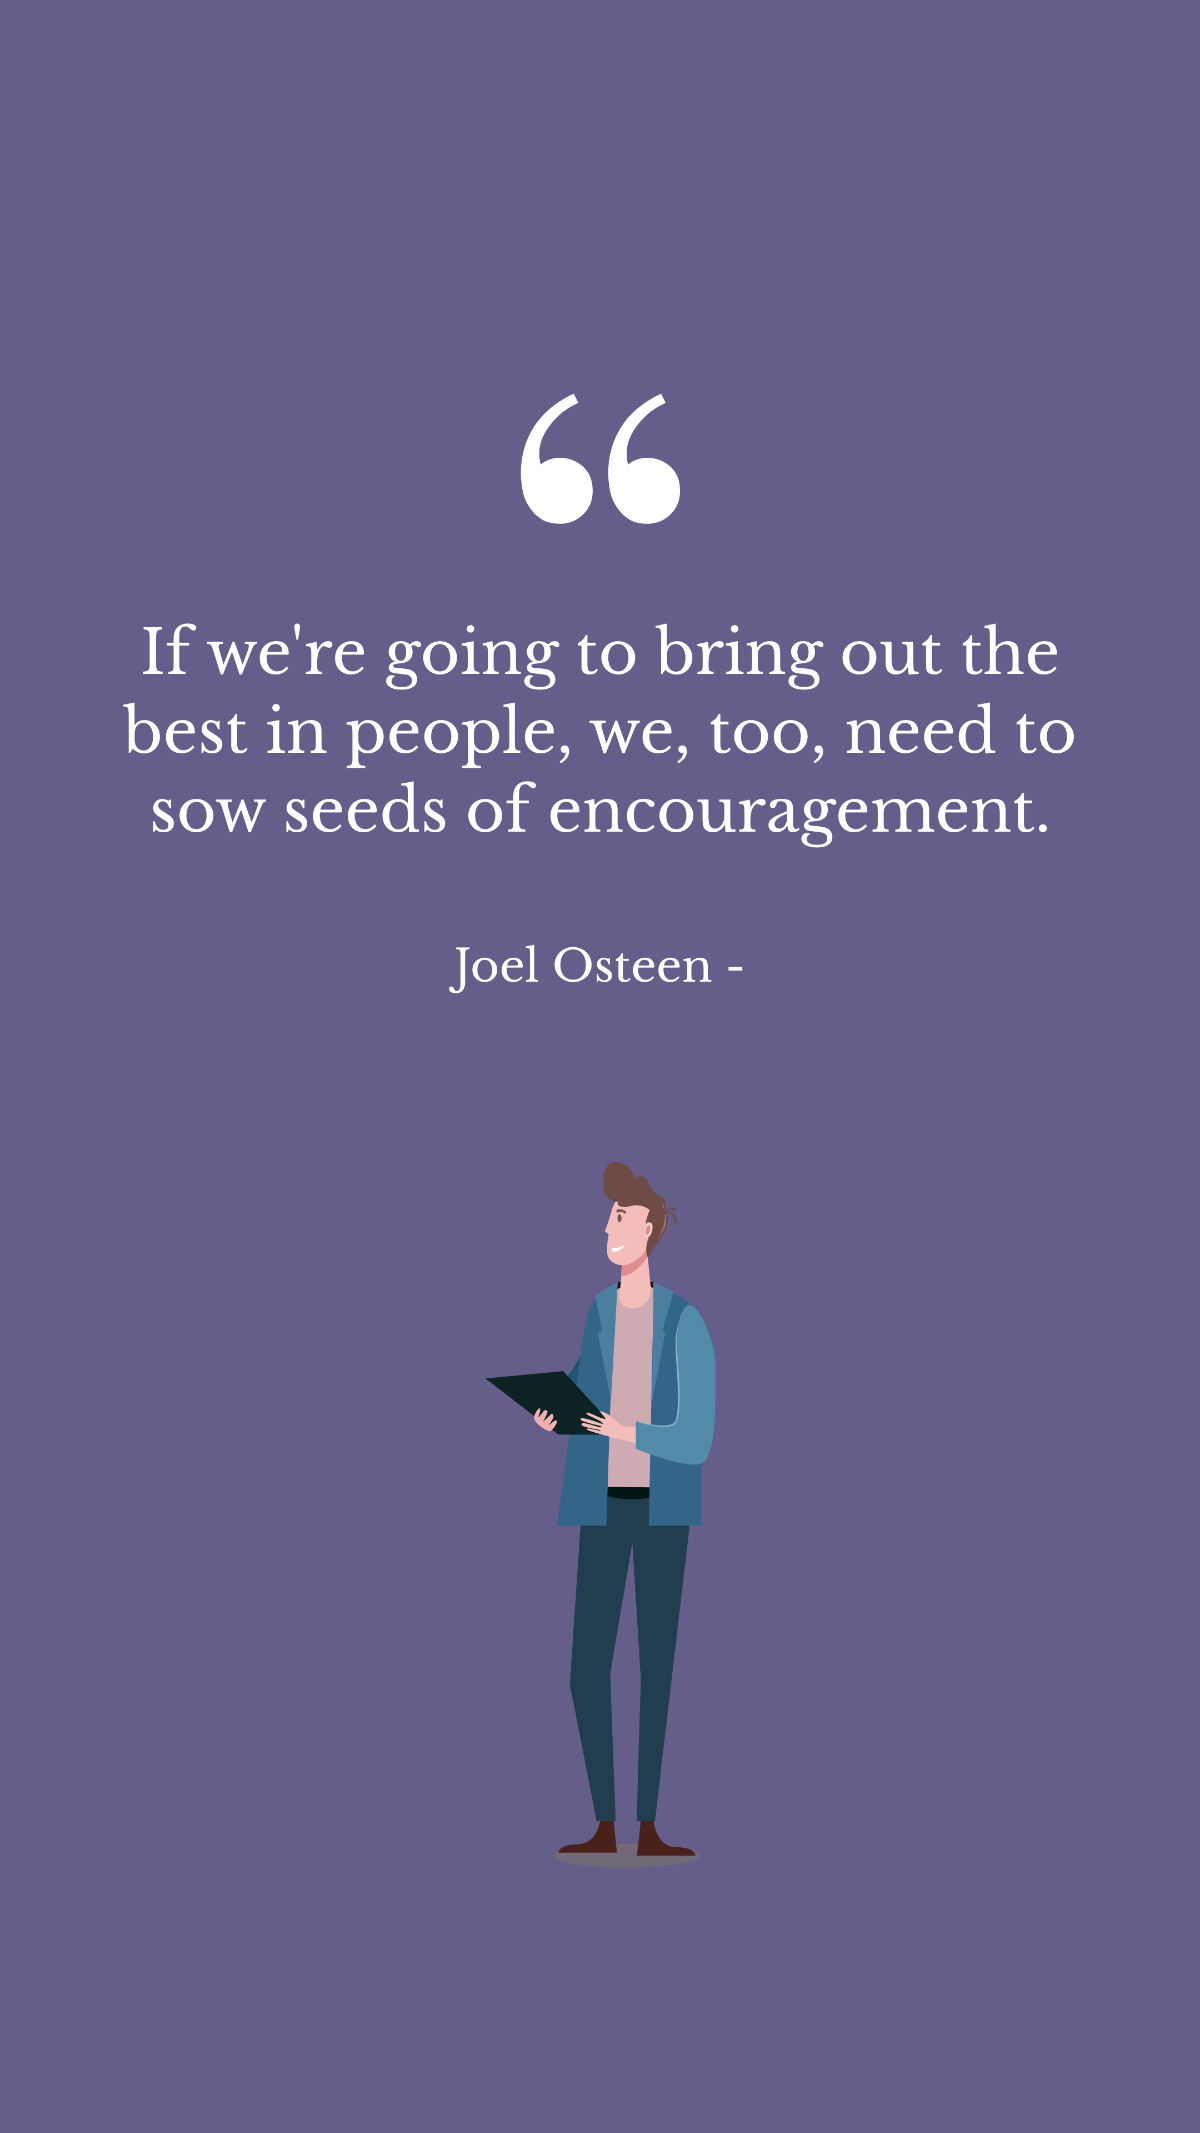 Free Joel Osteen - If we're going to bring out the best in people, we, too, need to sow seeds of encouragement. Template